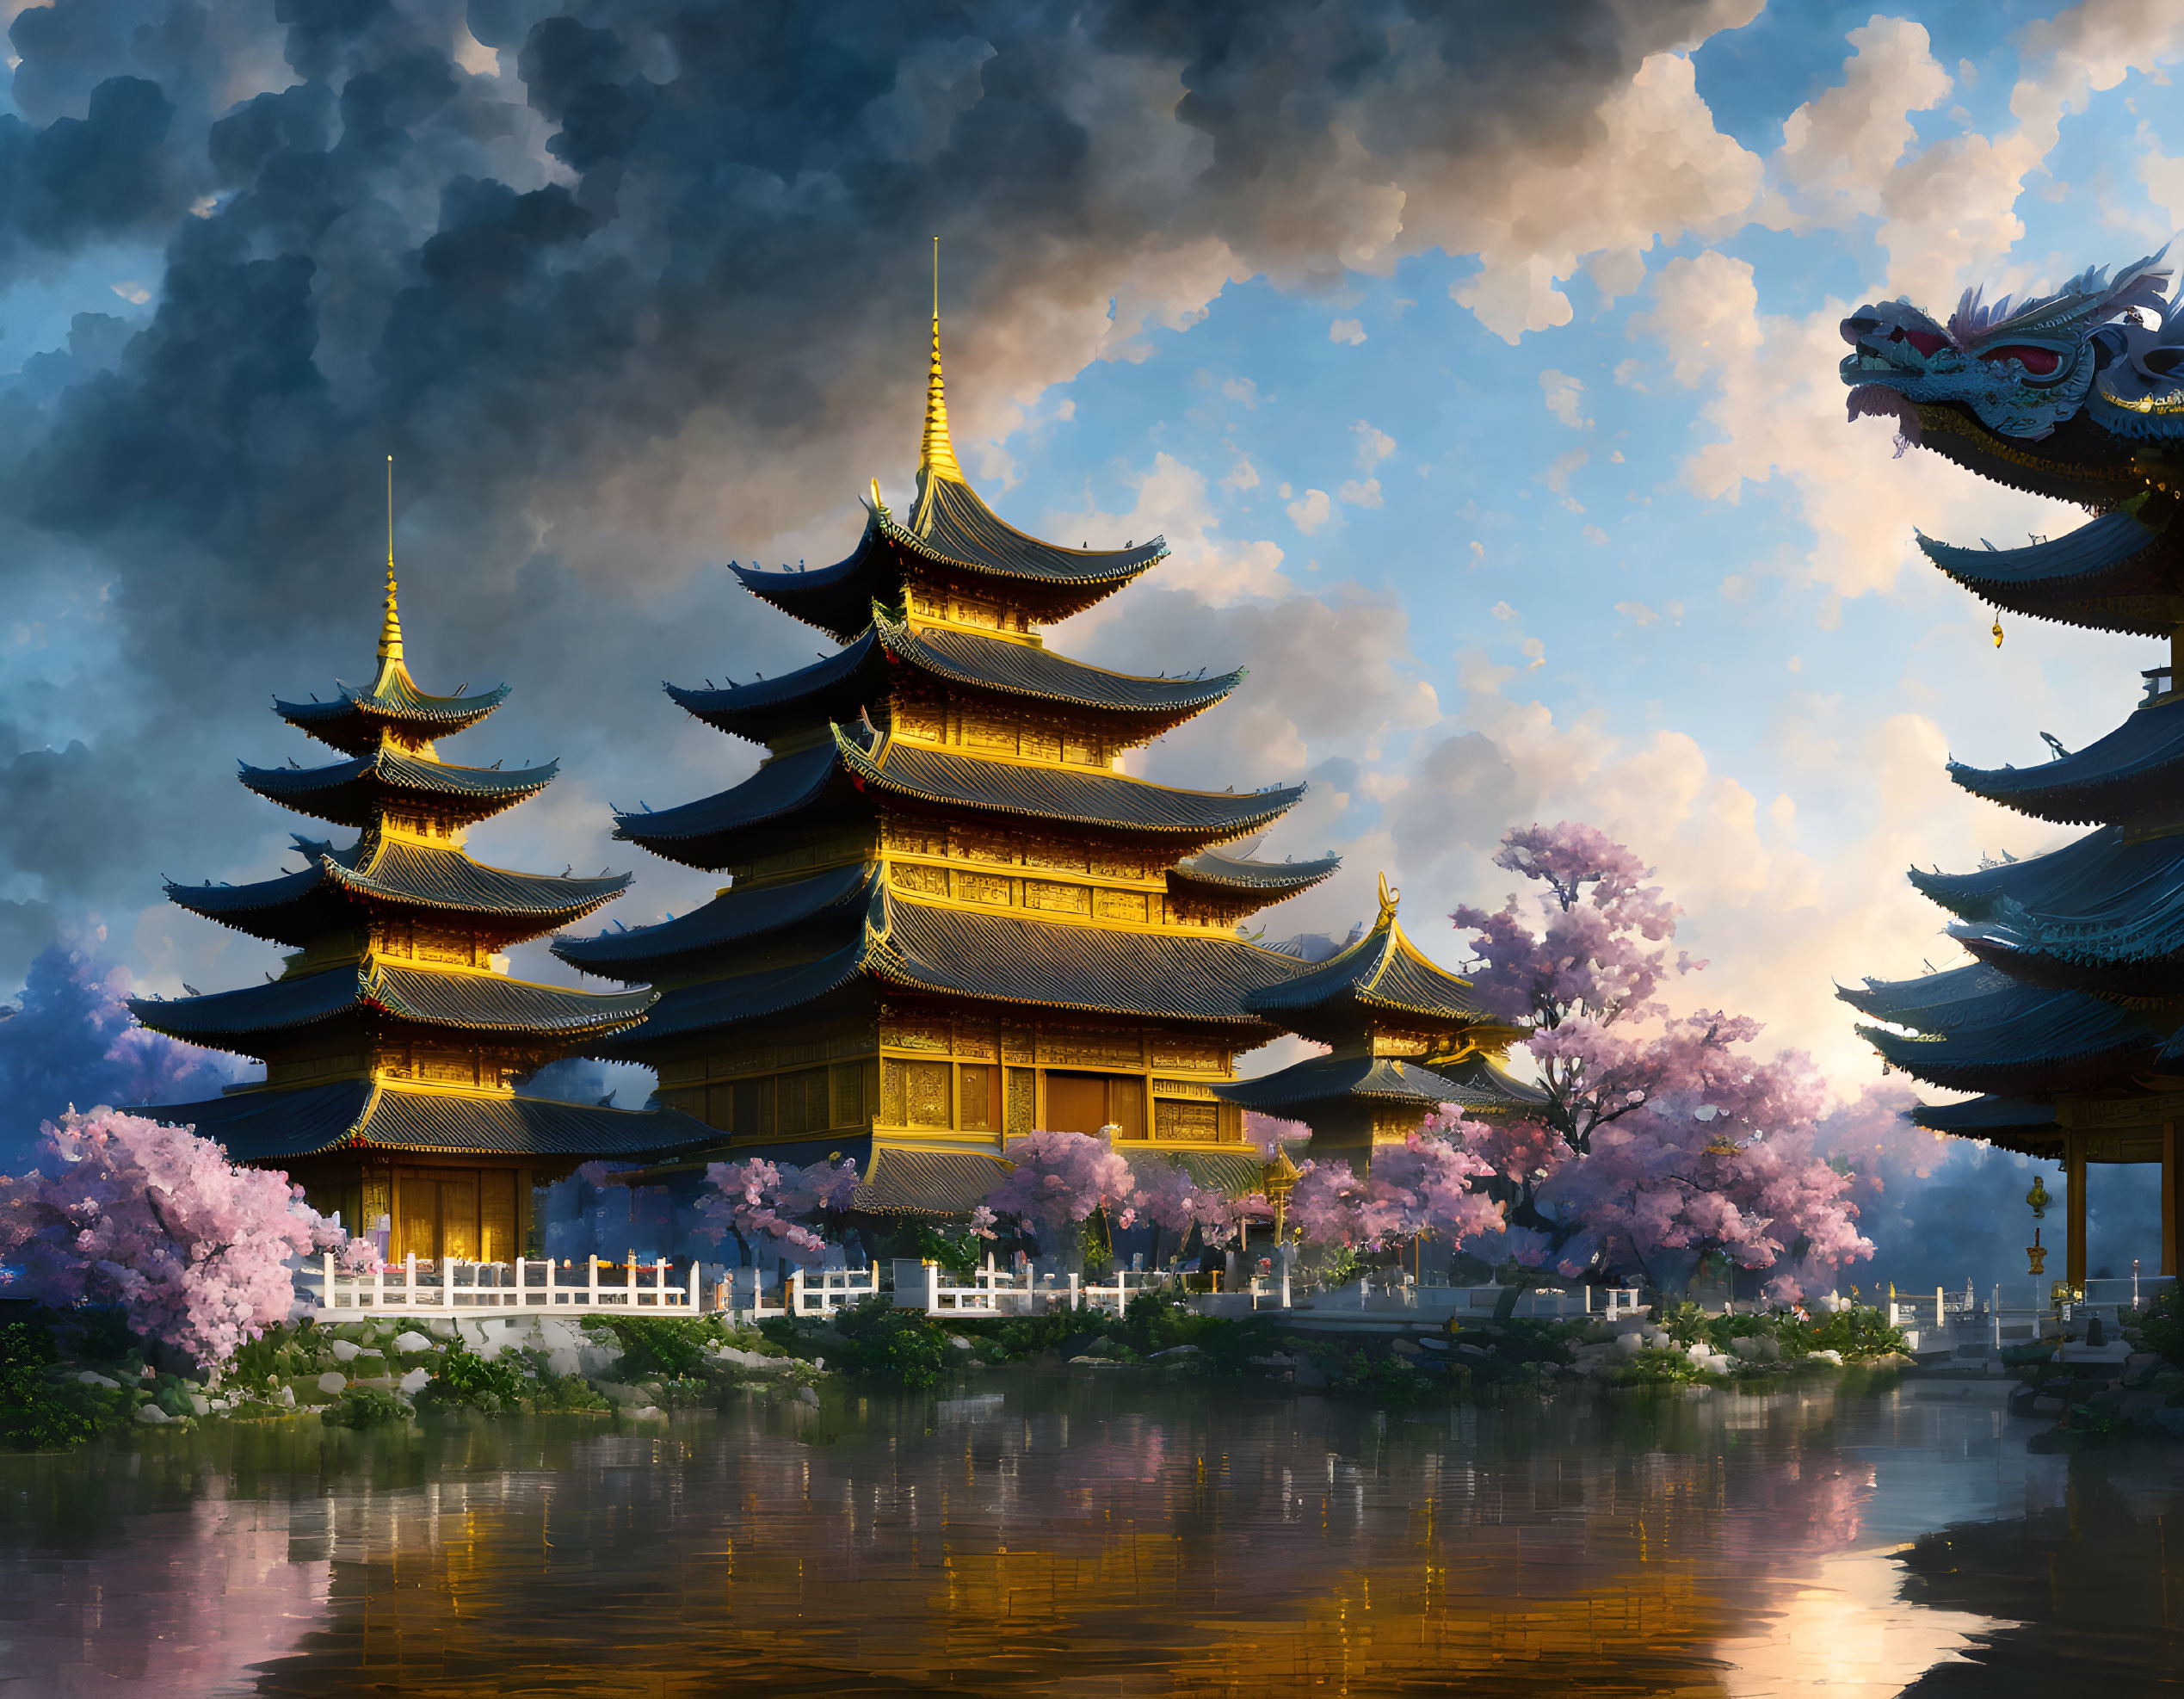 Asian Pagodas and Cherry Blossoms by a Tranquil River at Dusk